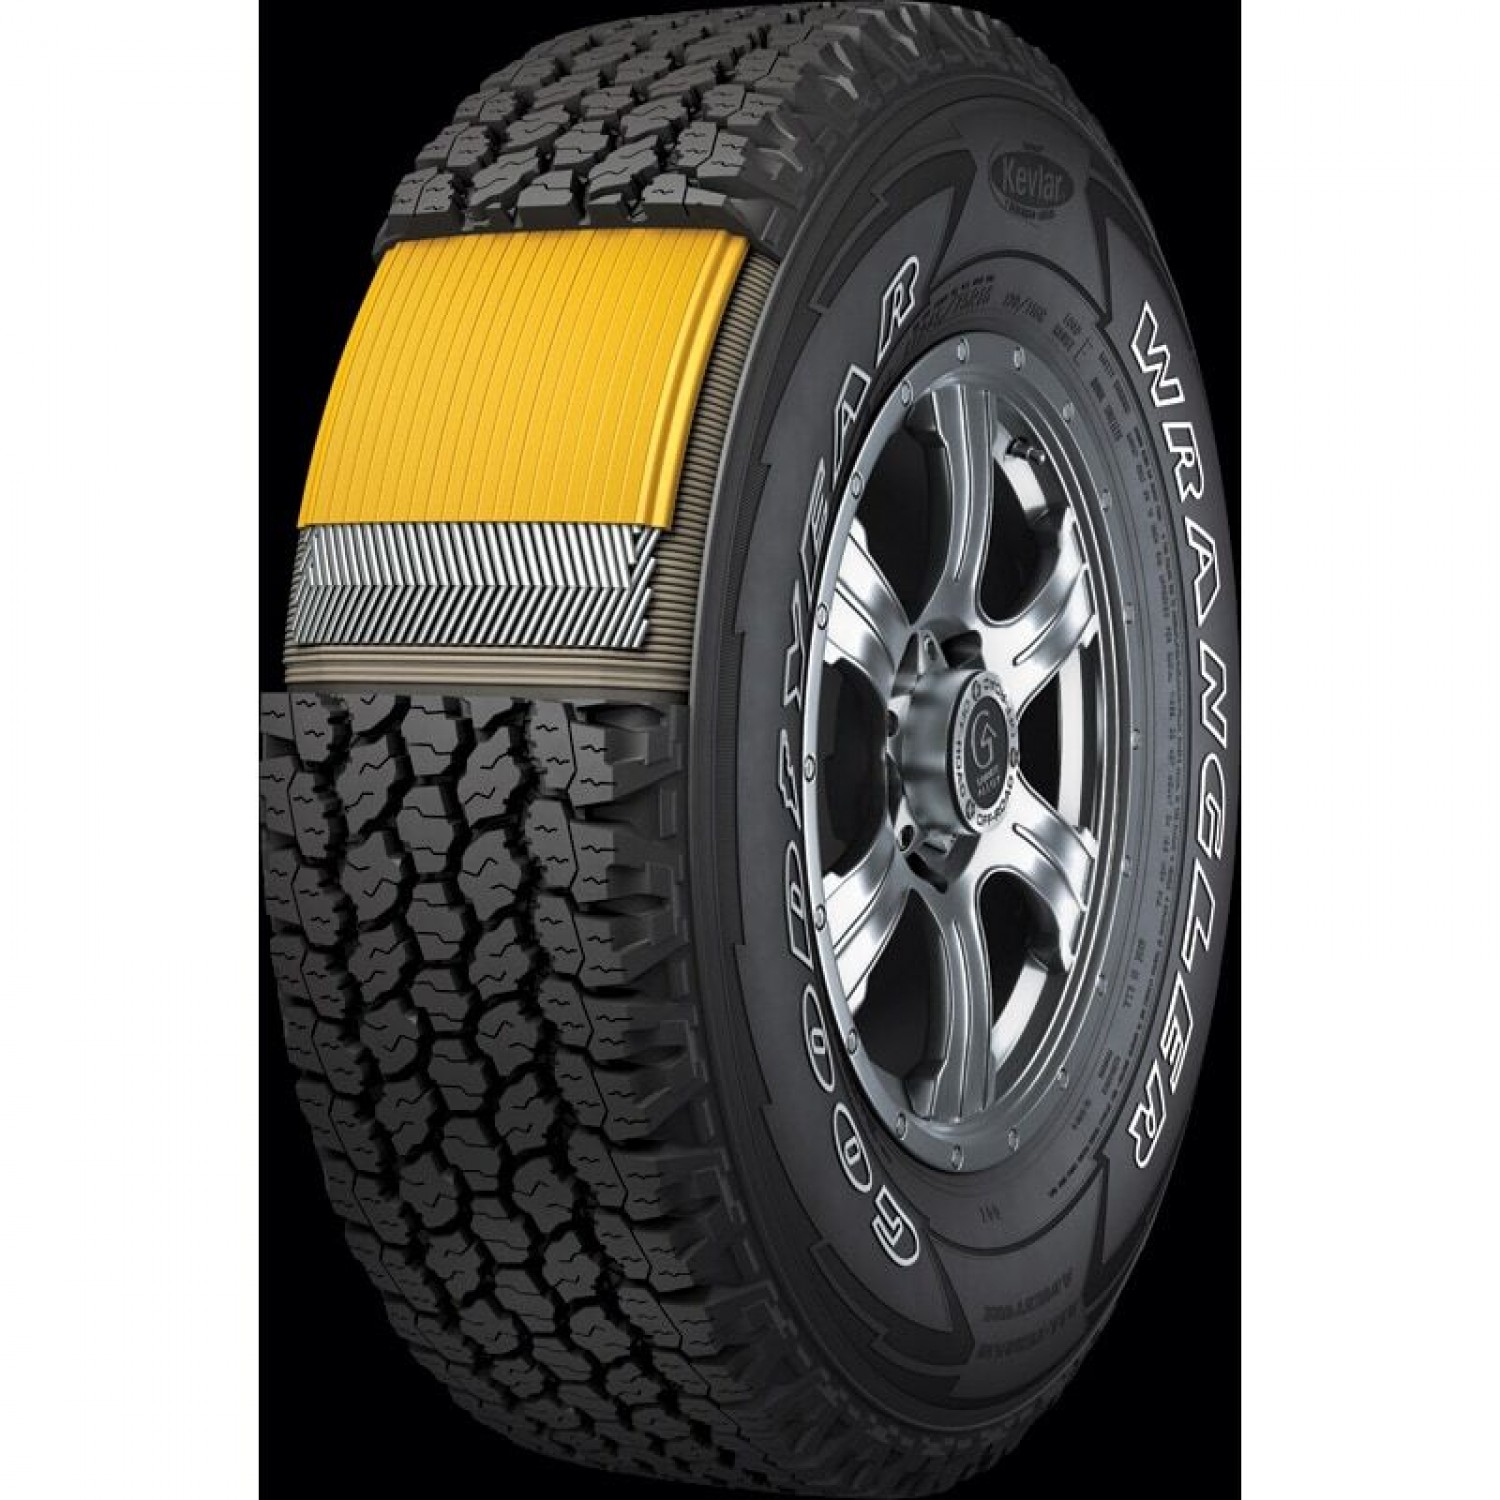 Goodyear Wrangler AT Adventure With Kevlar Outlined White Letters Tire (255/70R17  112T) vzn121228